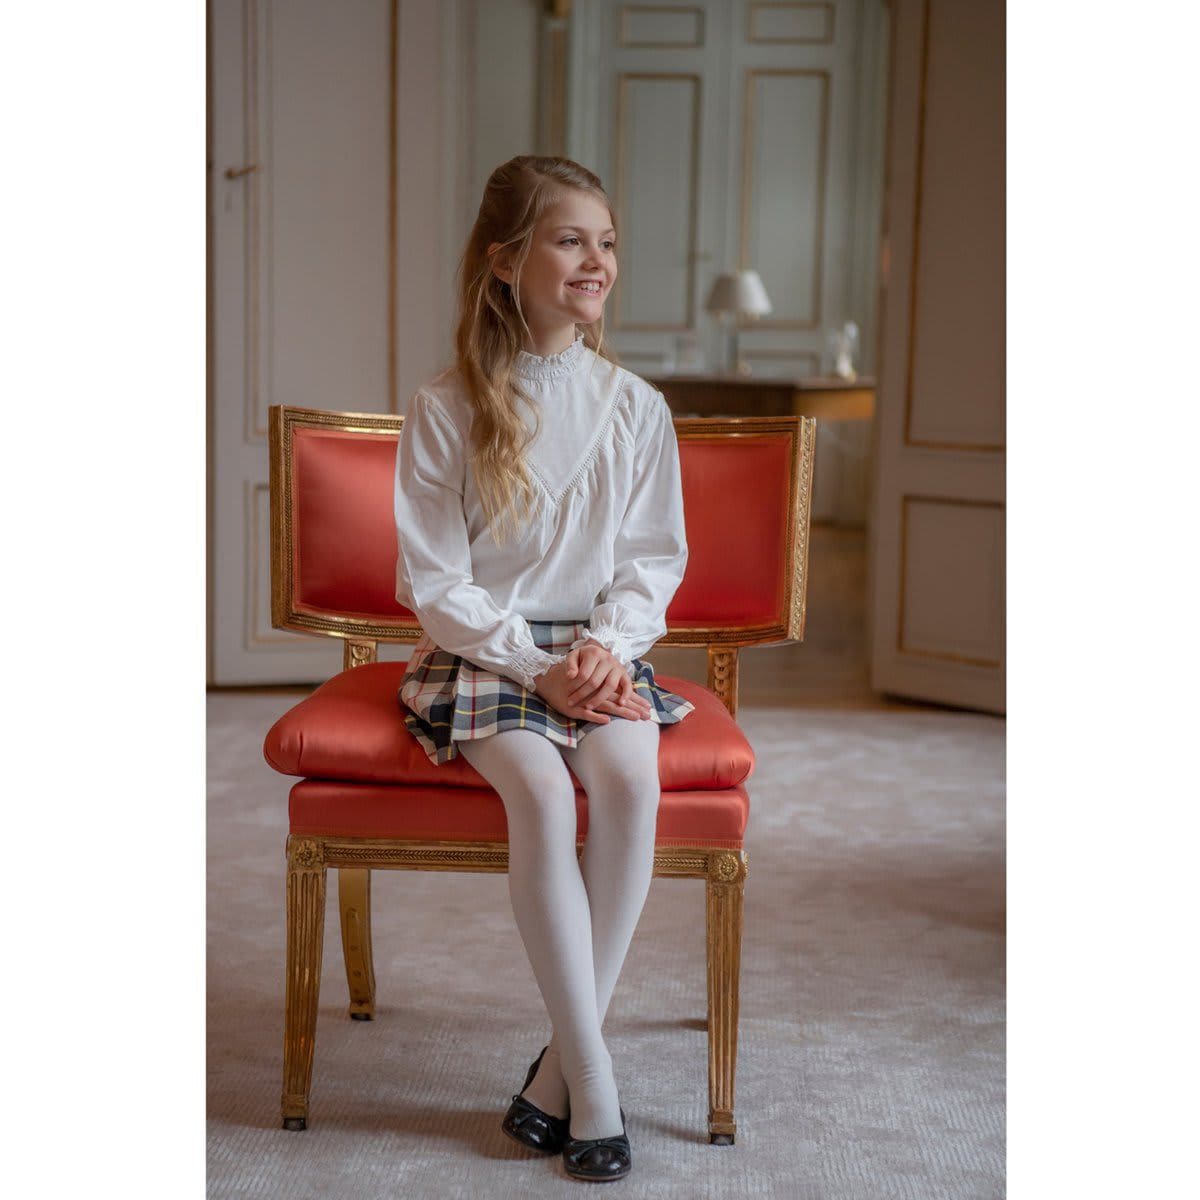 The future Queen posed for the photos at Haga Palace